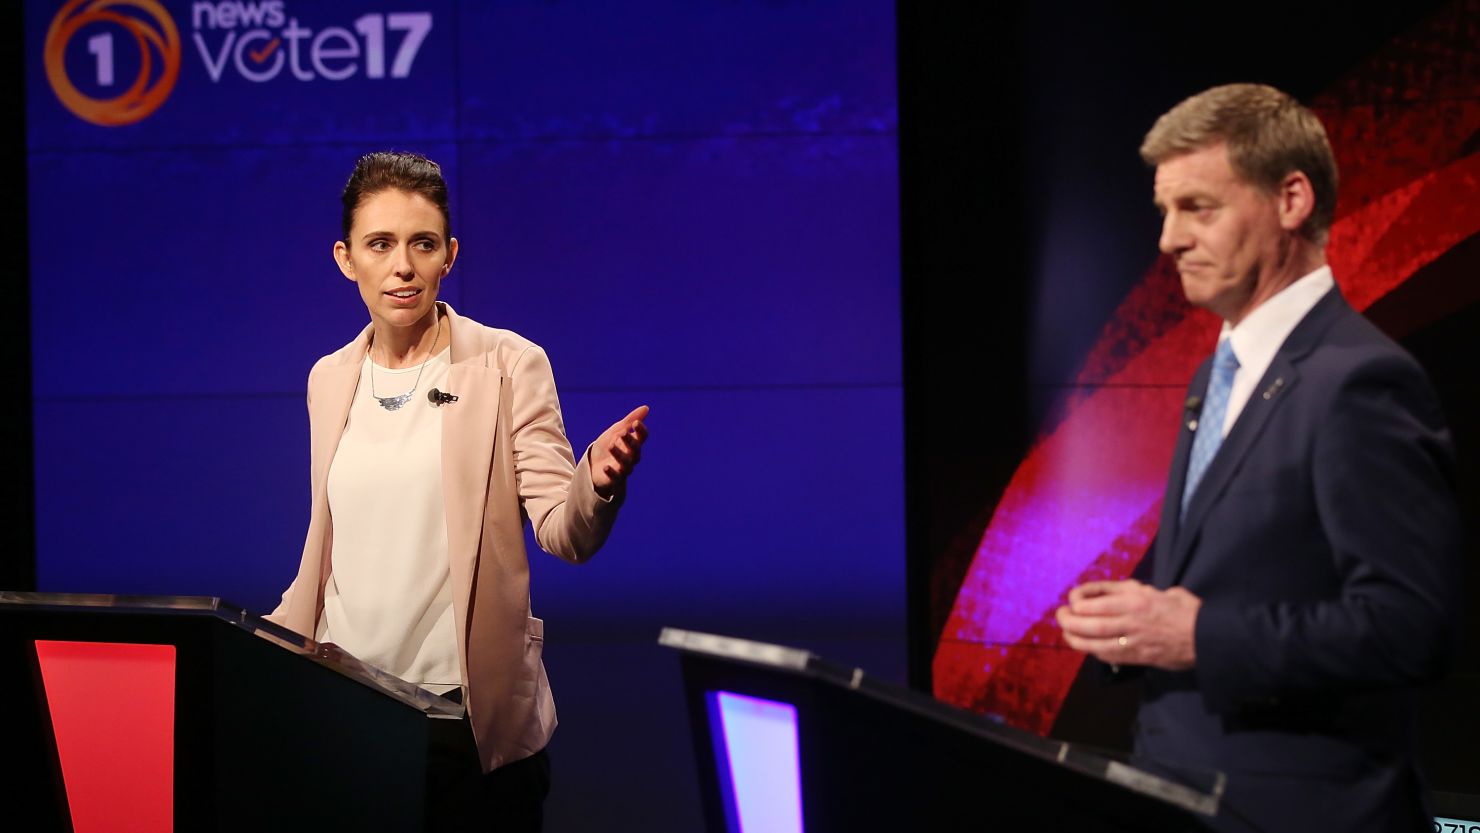  Labour leader Jacinda Ardern and National Party leader Bill English speak during an election debate on August 31 in Auckland.